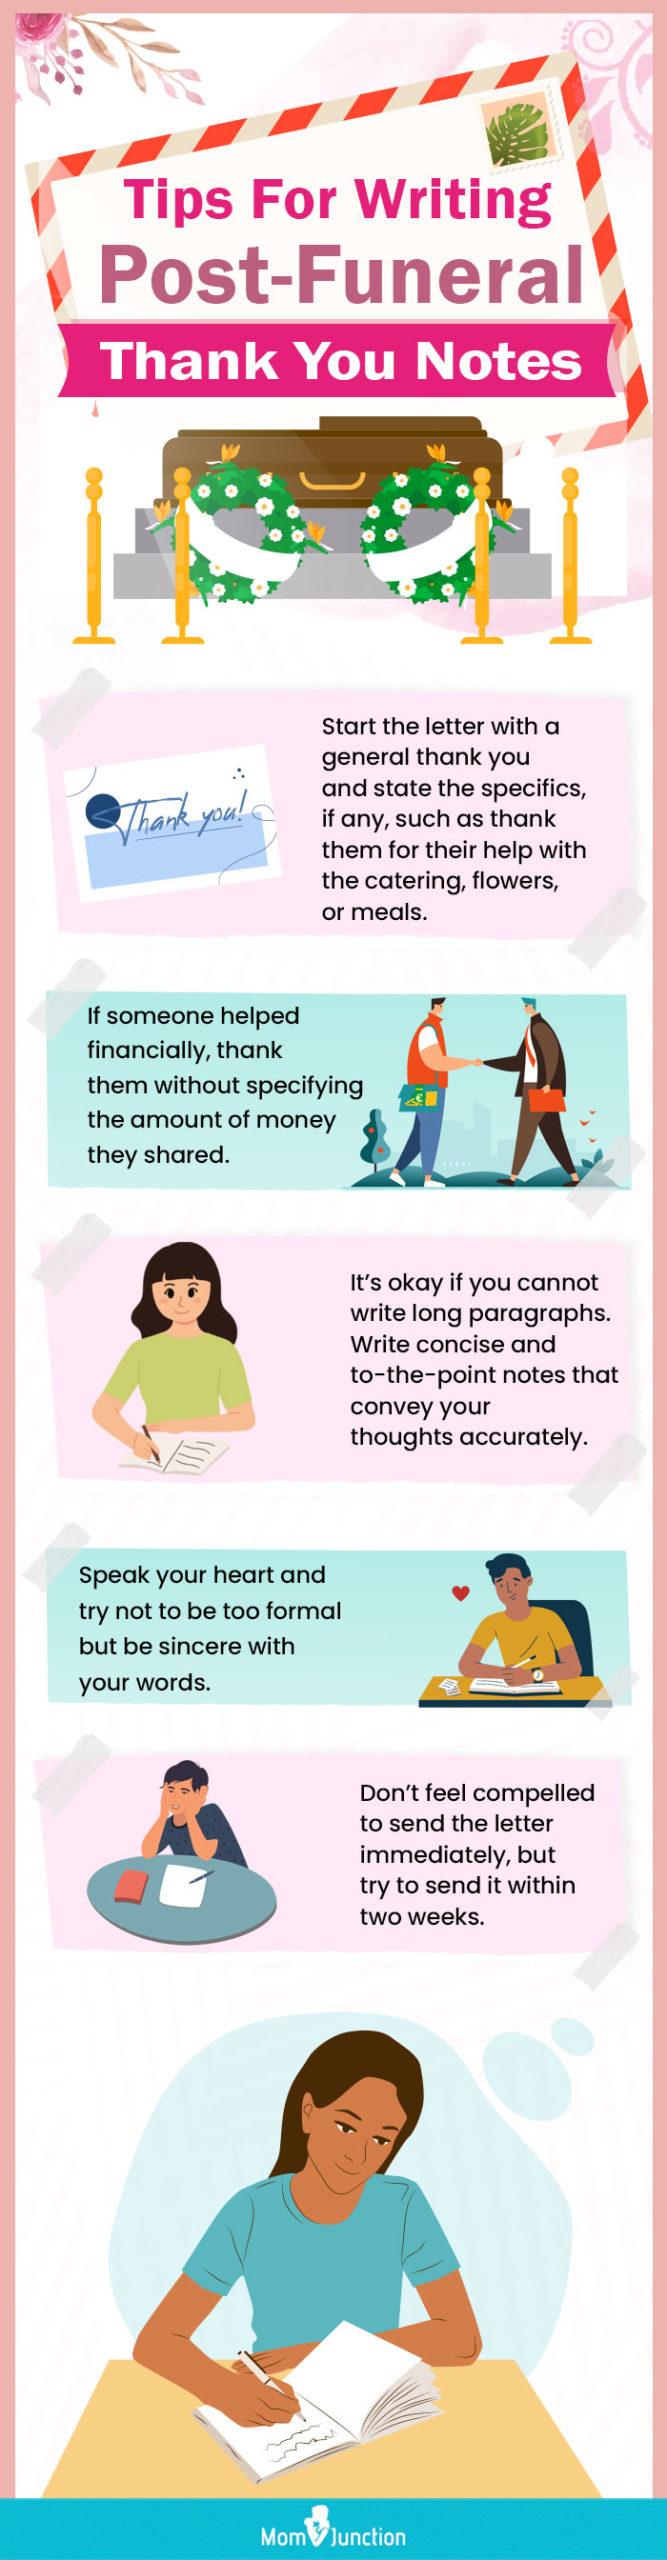 tips for writing post funeral thank you notes (infographic)